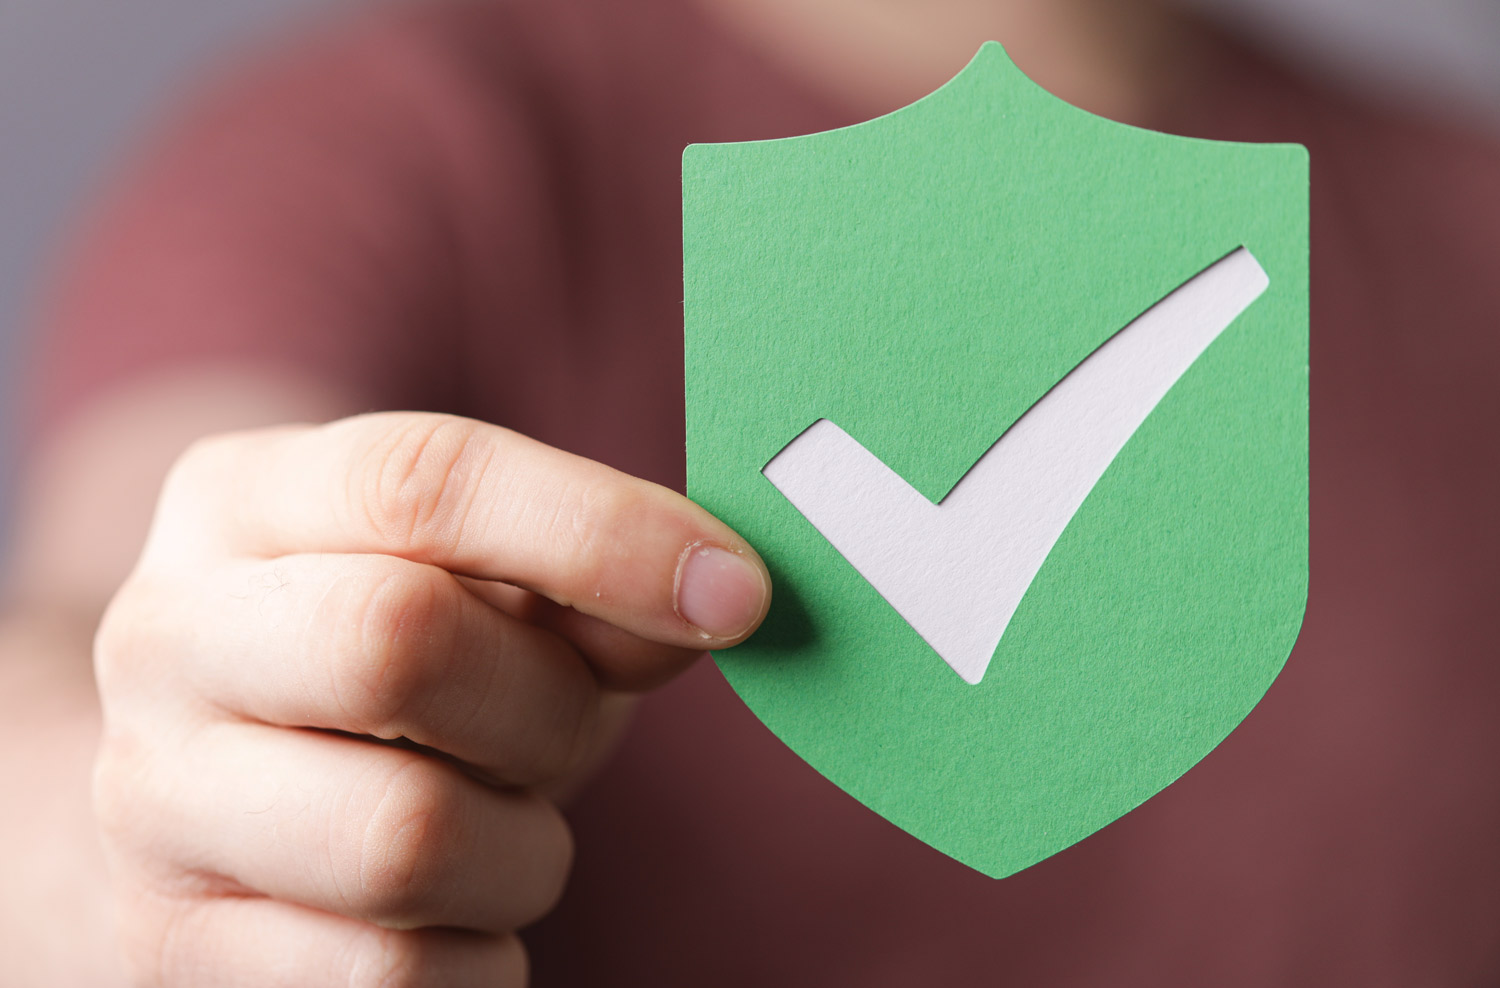 Hand holding up green shield with white checkmark paper icon.